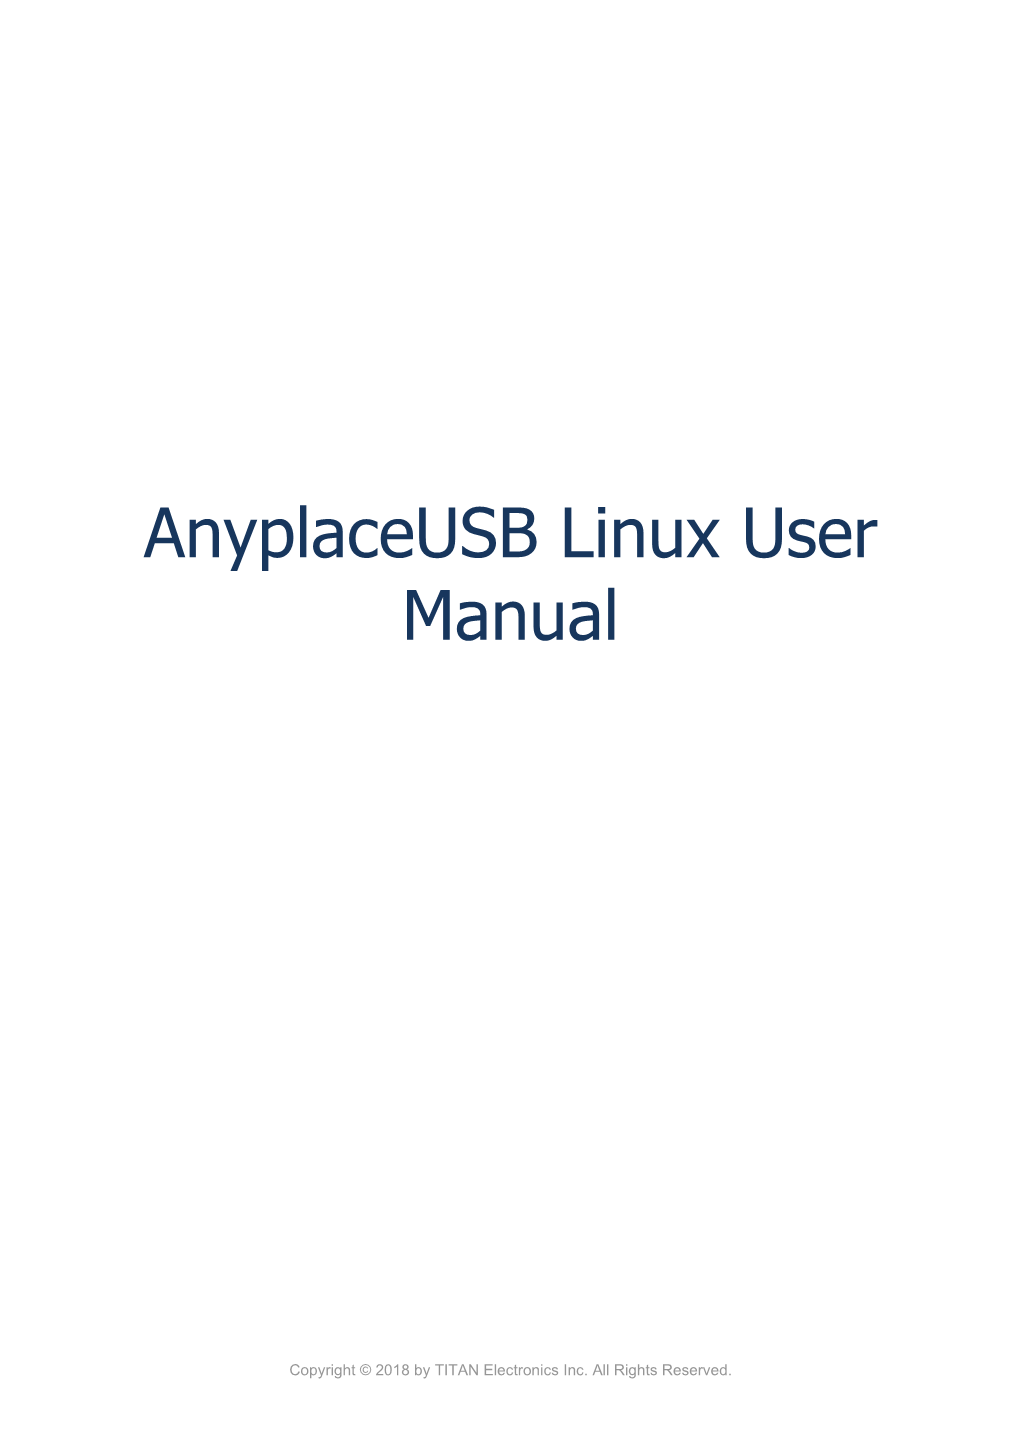 Anyplaceusb Linux User Manual Content Introduction